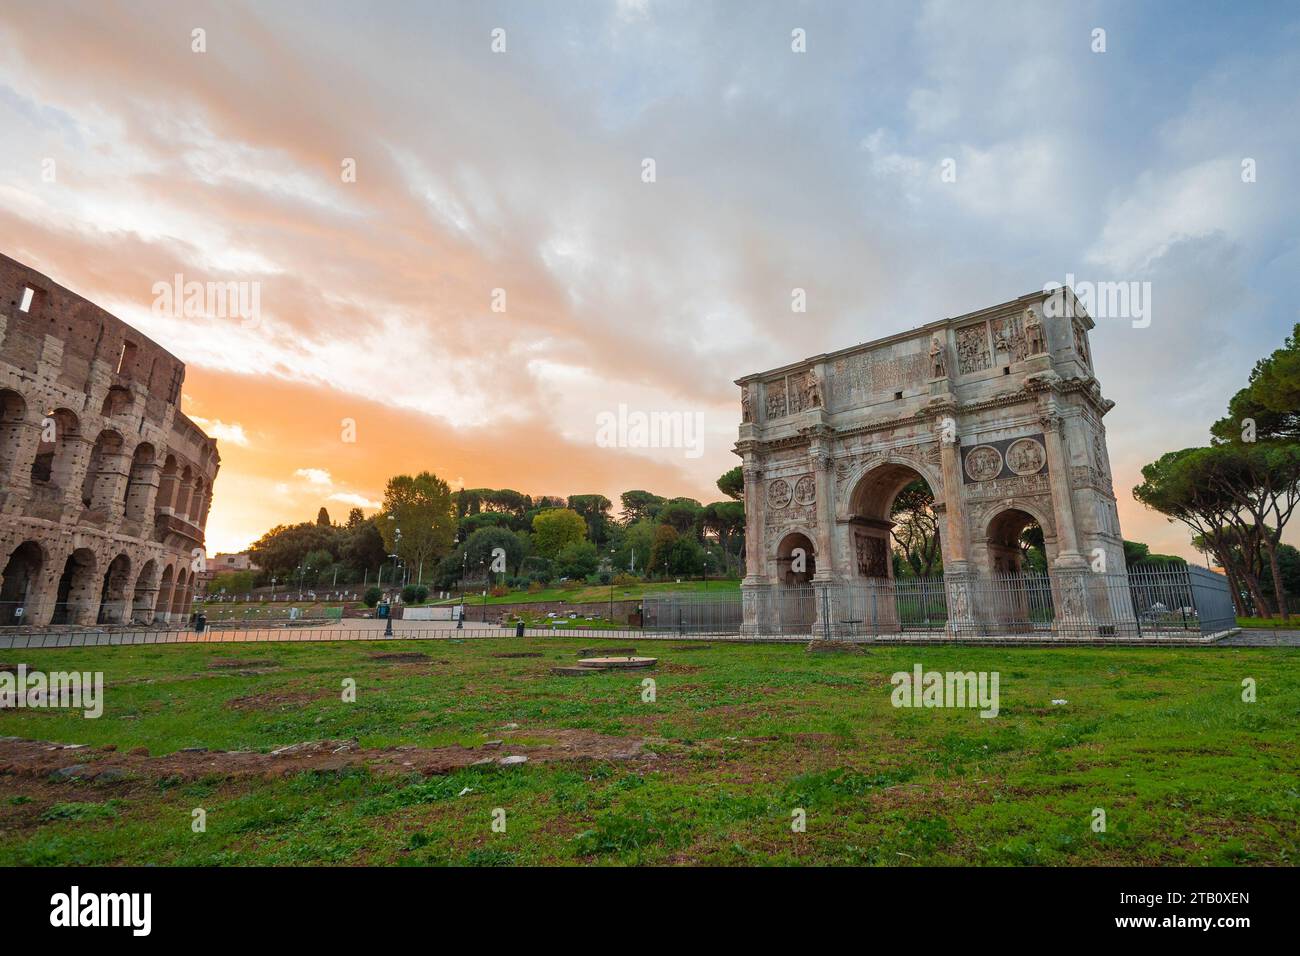 Arco di Constantino or Constantine's arch in ancient rome, big arch spanning just next to the famous colloseum, in early morning hours with sun just a Stock Photo